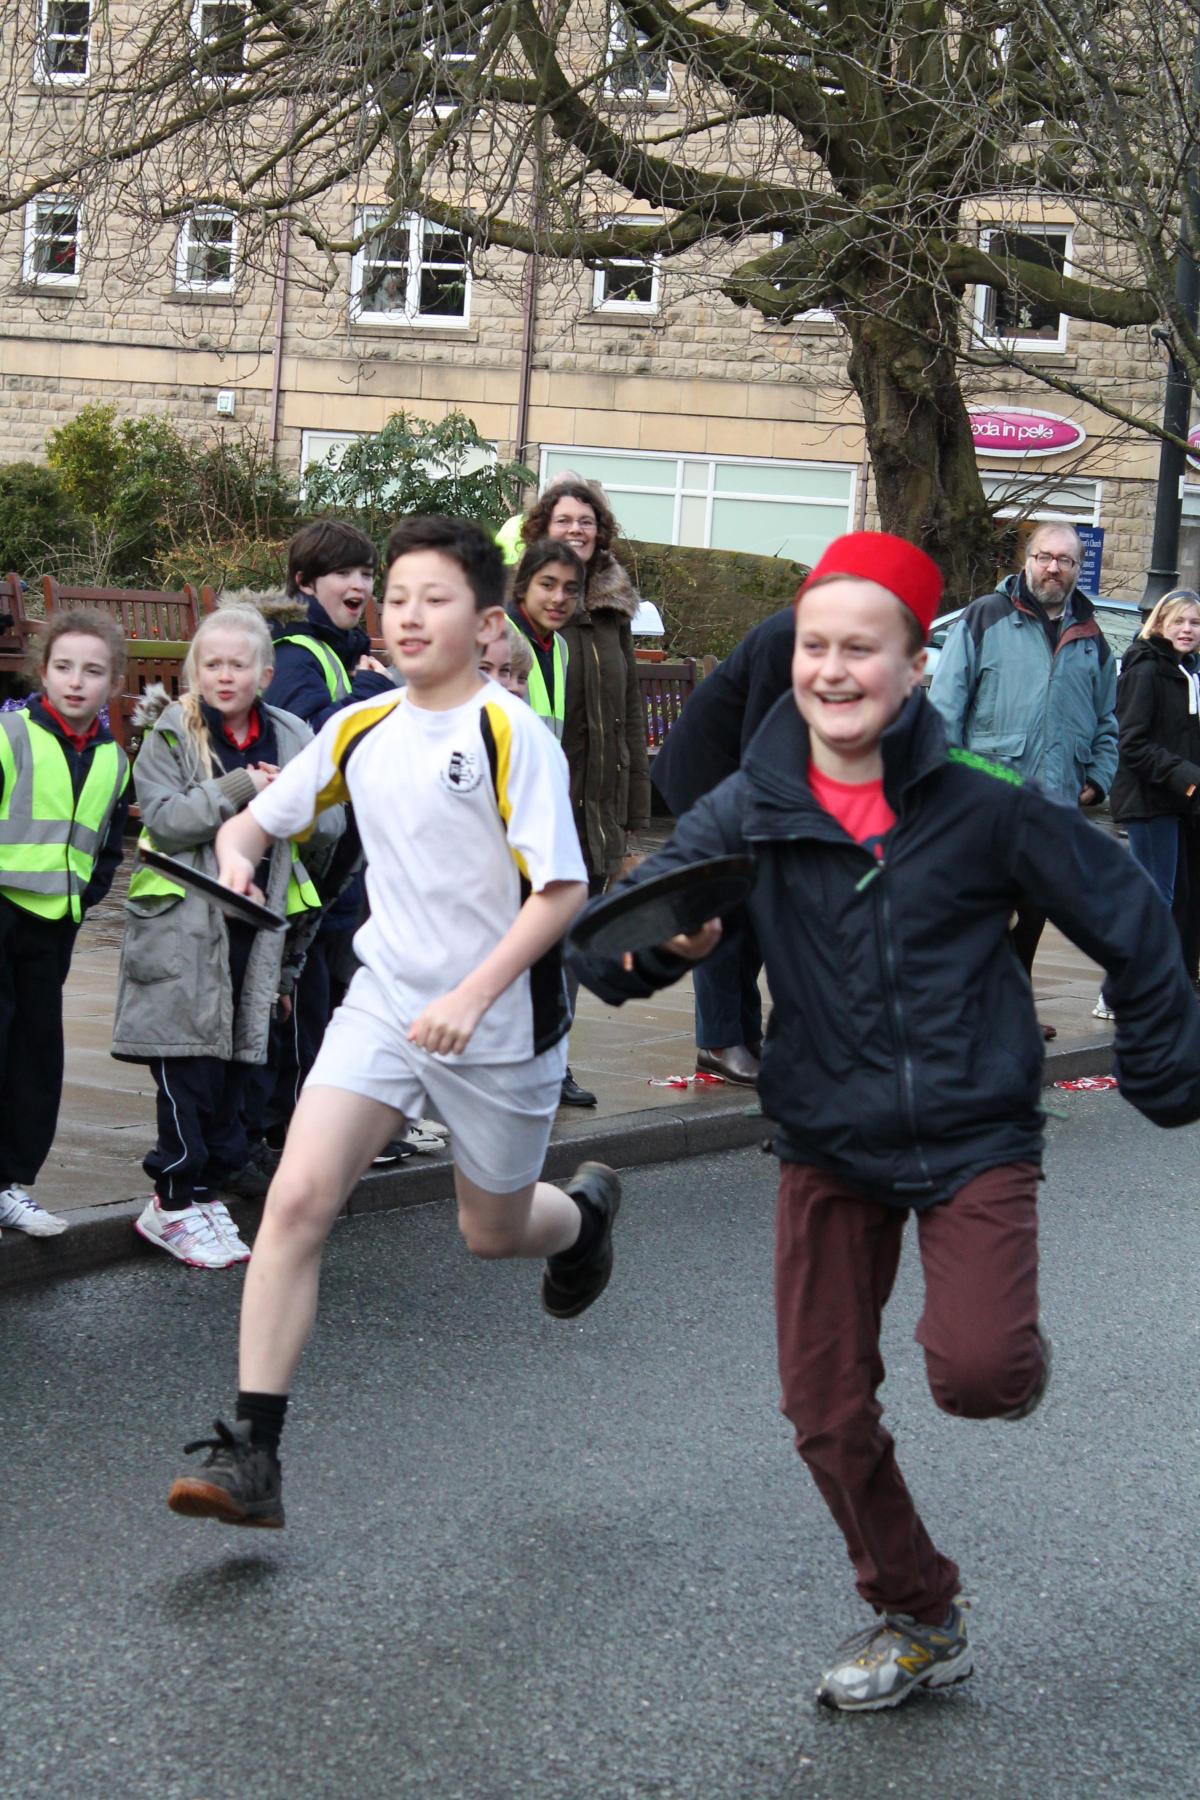 Ilkley Grammary School pupil Fin Tunney, in the red hat, winning the Year 8 race